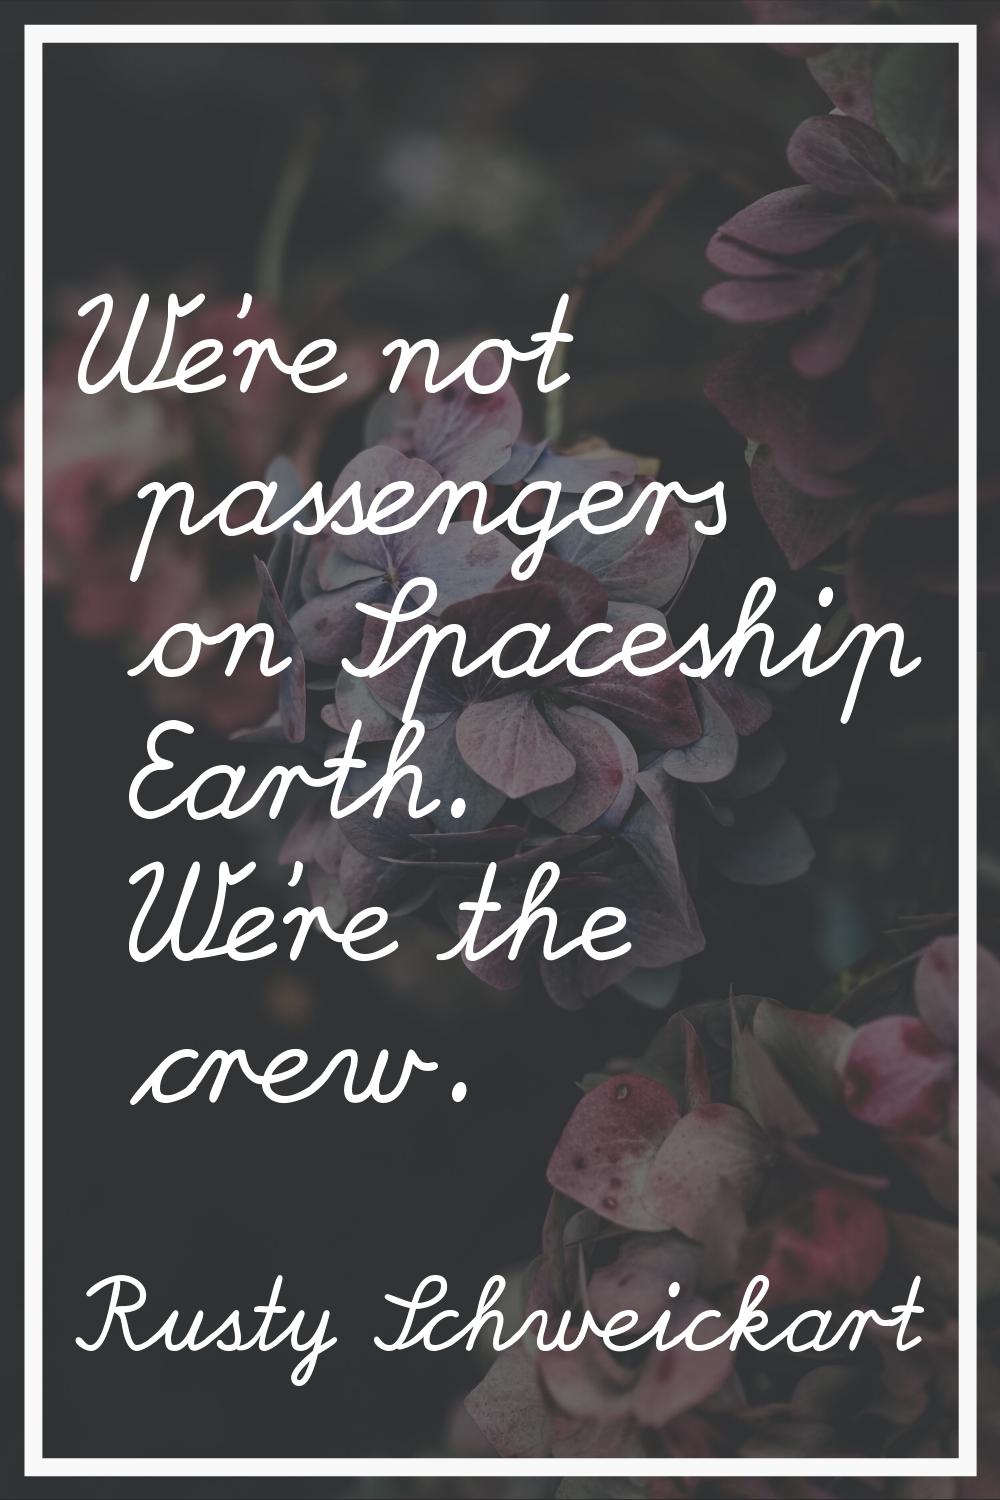 We're not passengers on Spaceship Earth. We're the crew.